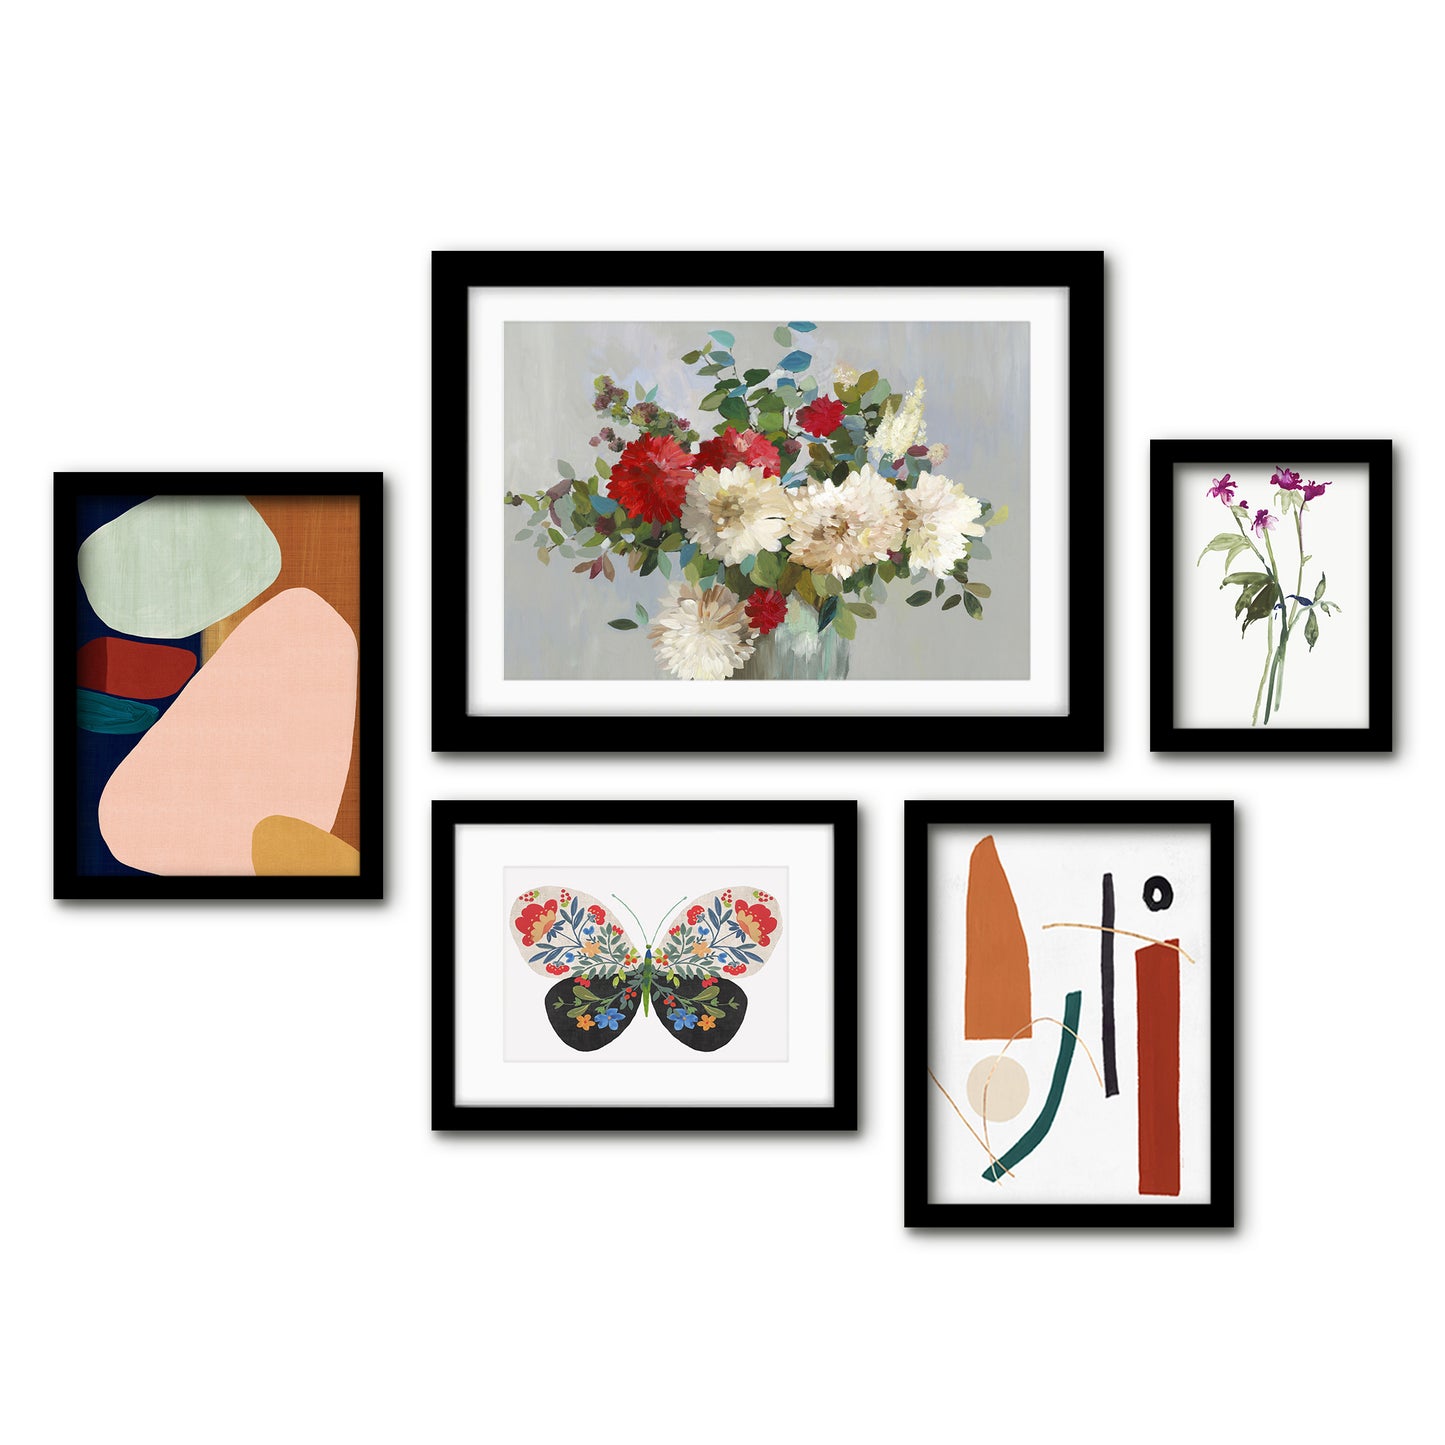 Americanflat 5 Piece Black Framed Gallery Wall Art Set - Watercolor Abstract Floral Woman Sillouhette